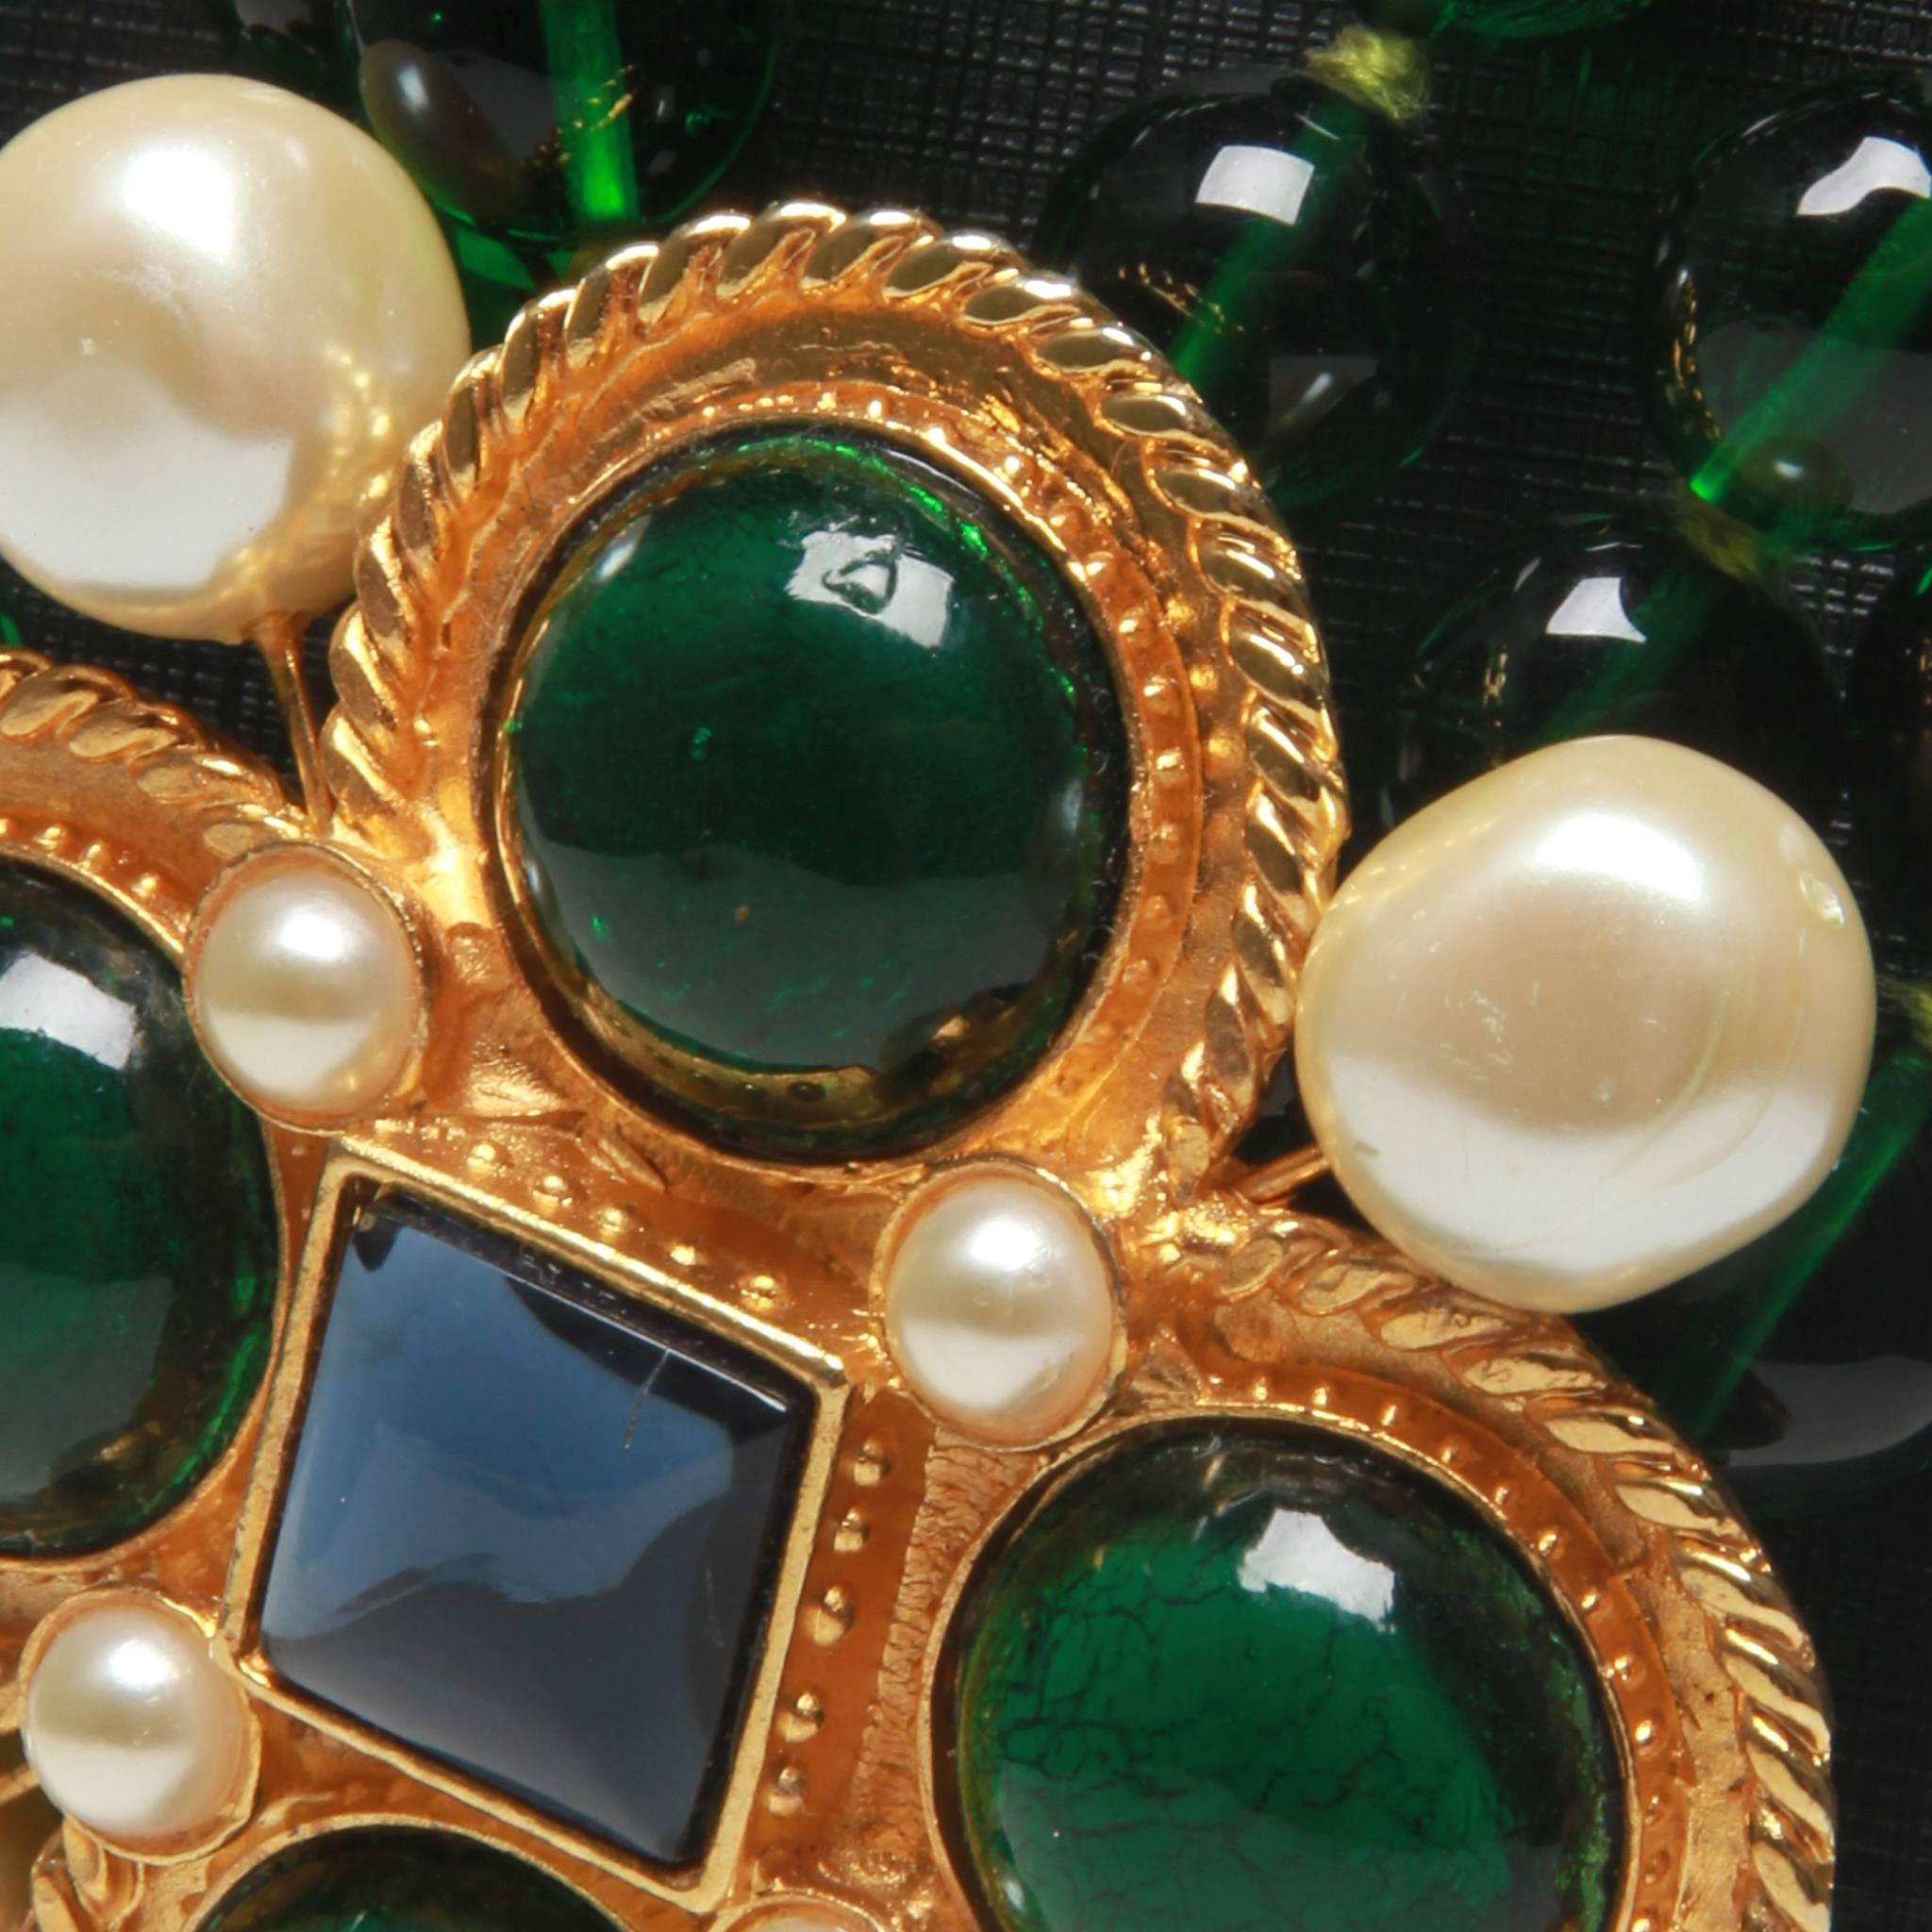 A pristine vintage style Chanel necklace with a gripoix brooch features emerald and blue poured glass detail with pearl throughout the outside.

Fastener: Pins at the back.

Featuring x4 green giproix stones, x4 pearl with blue stone.

Highly